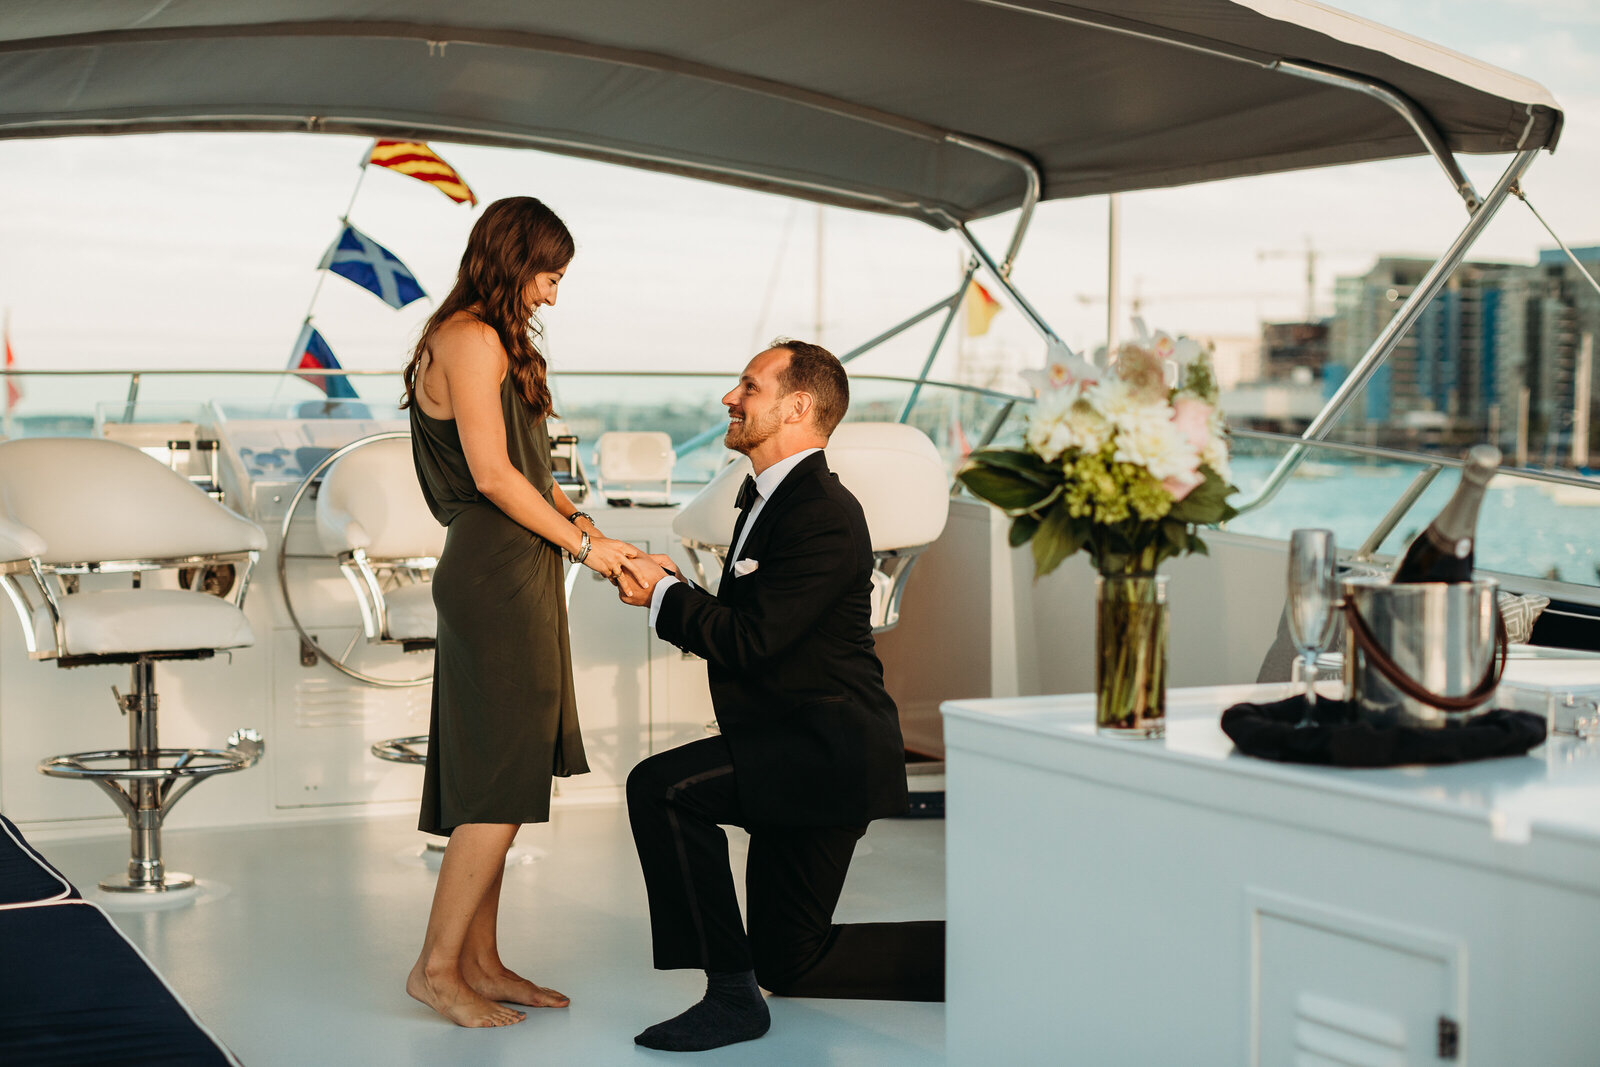 man proposes to woman on a yacht in boston harbor